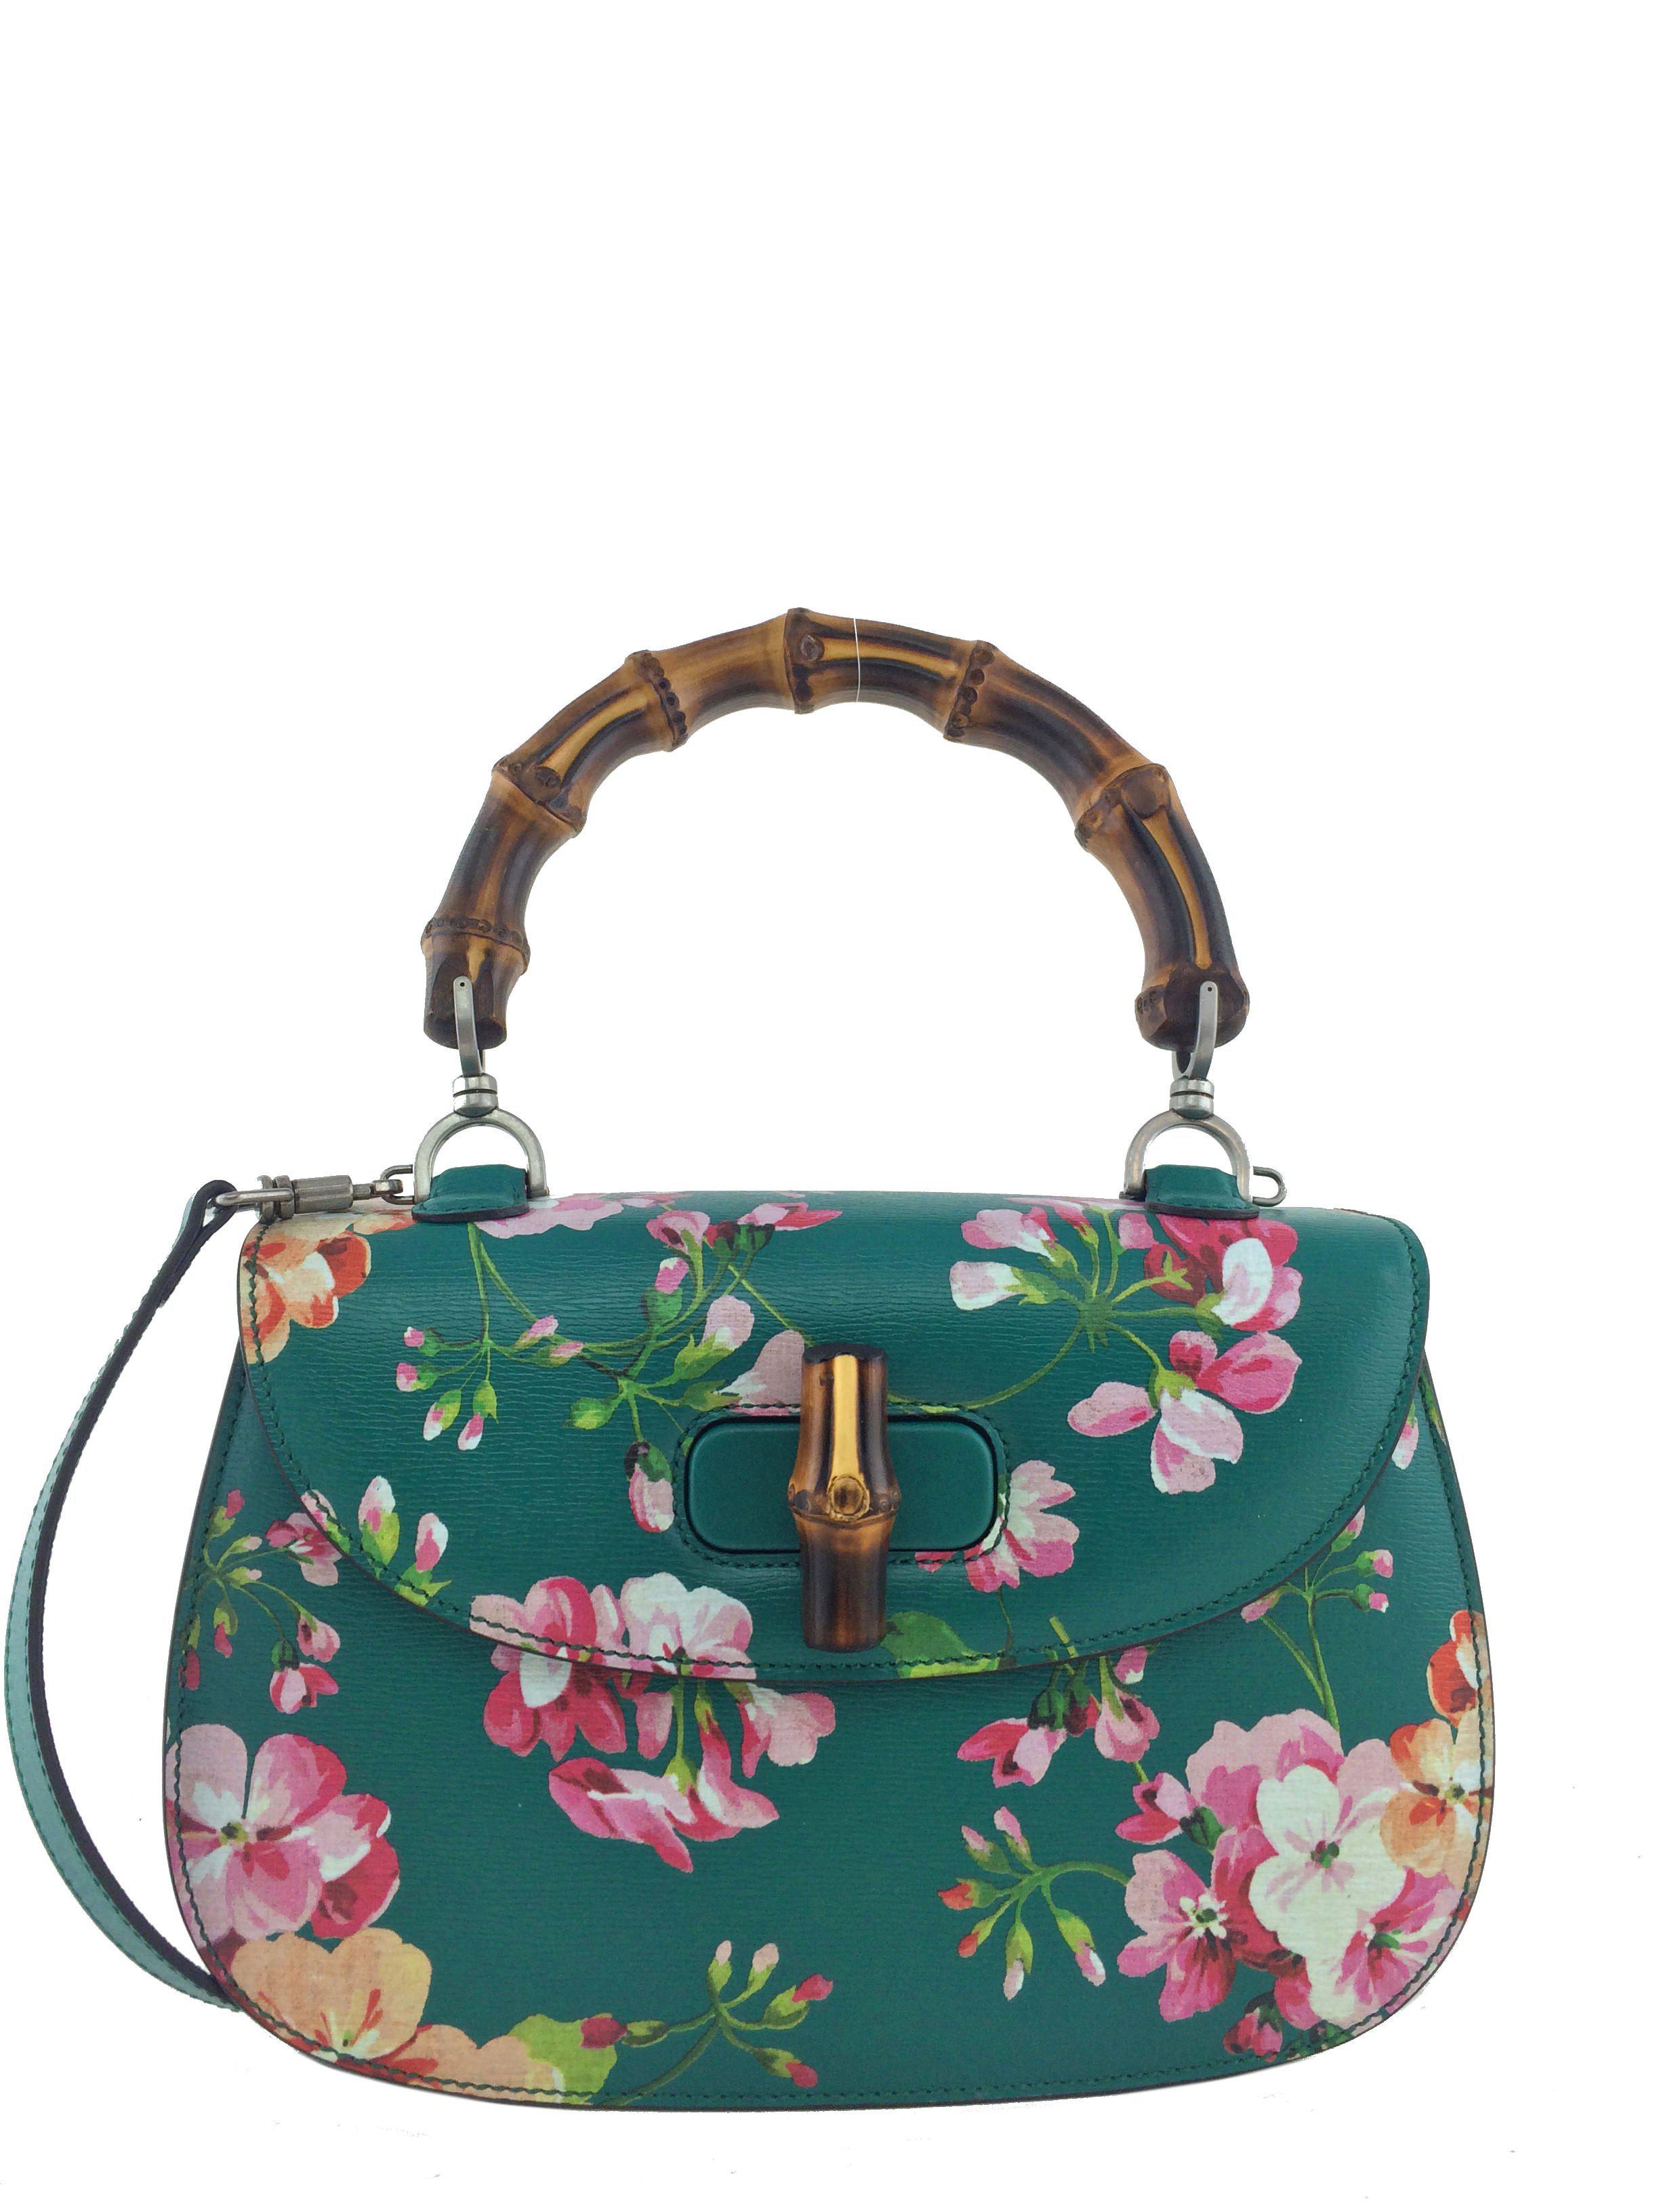 Gucci Bamboo Classic Blooms Small Top Handle Bag - Consigned Designs